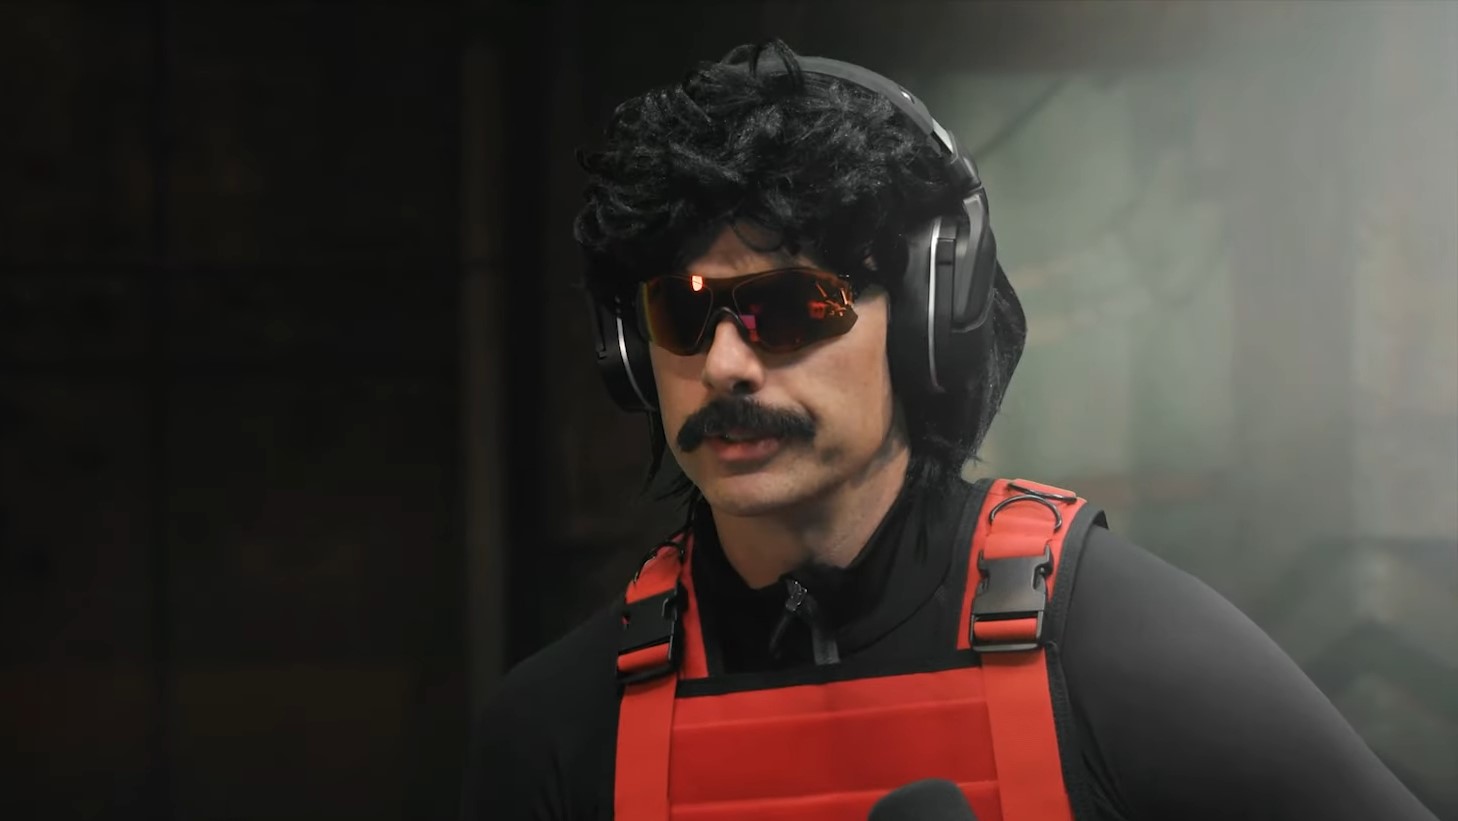 Dr Disrespect in a video astir Deadrop released by Midnight Society.